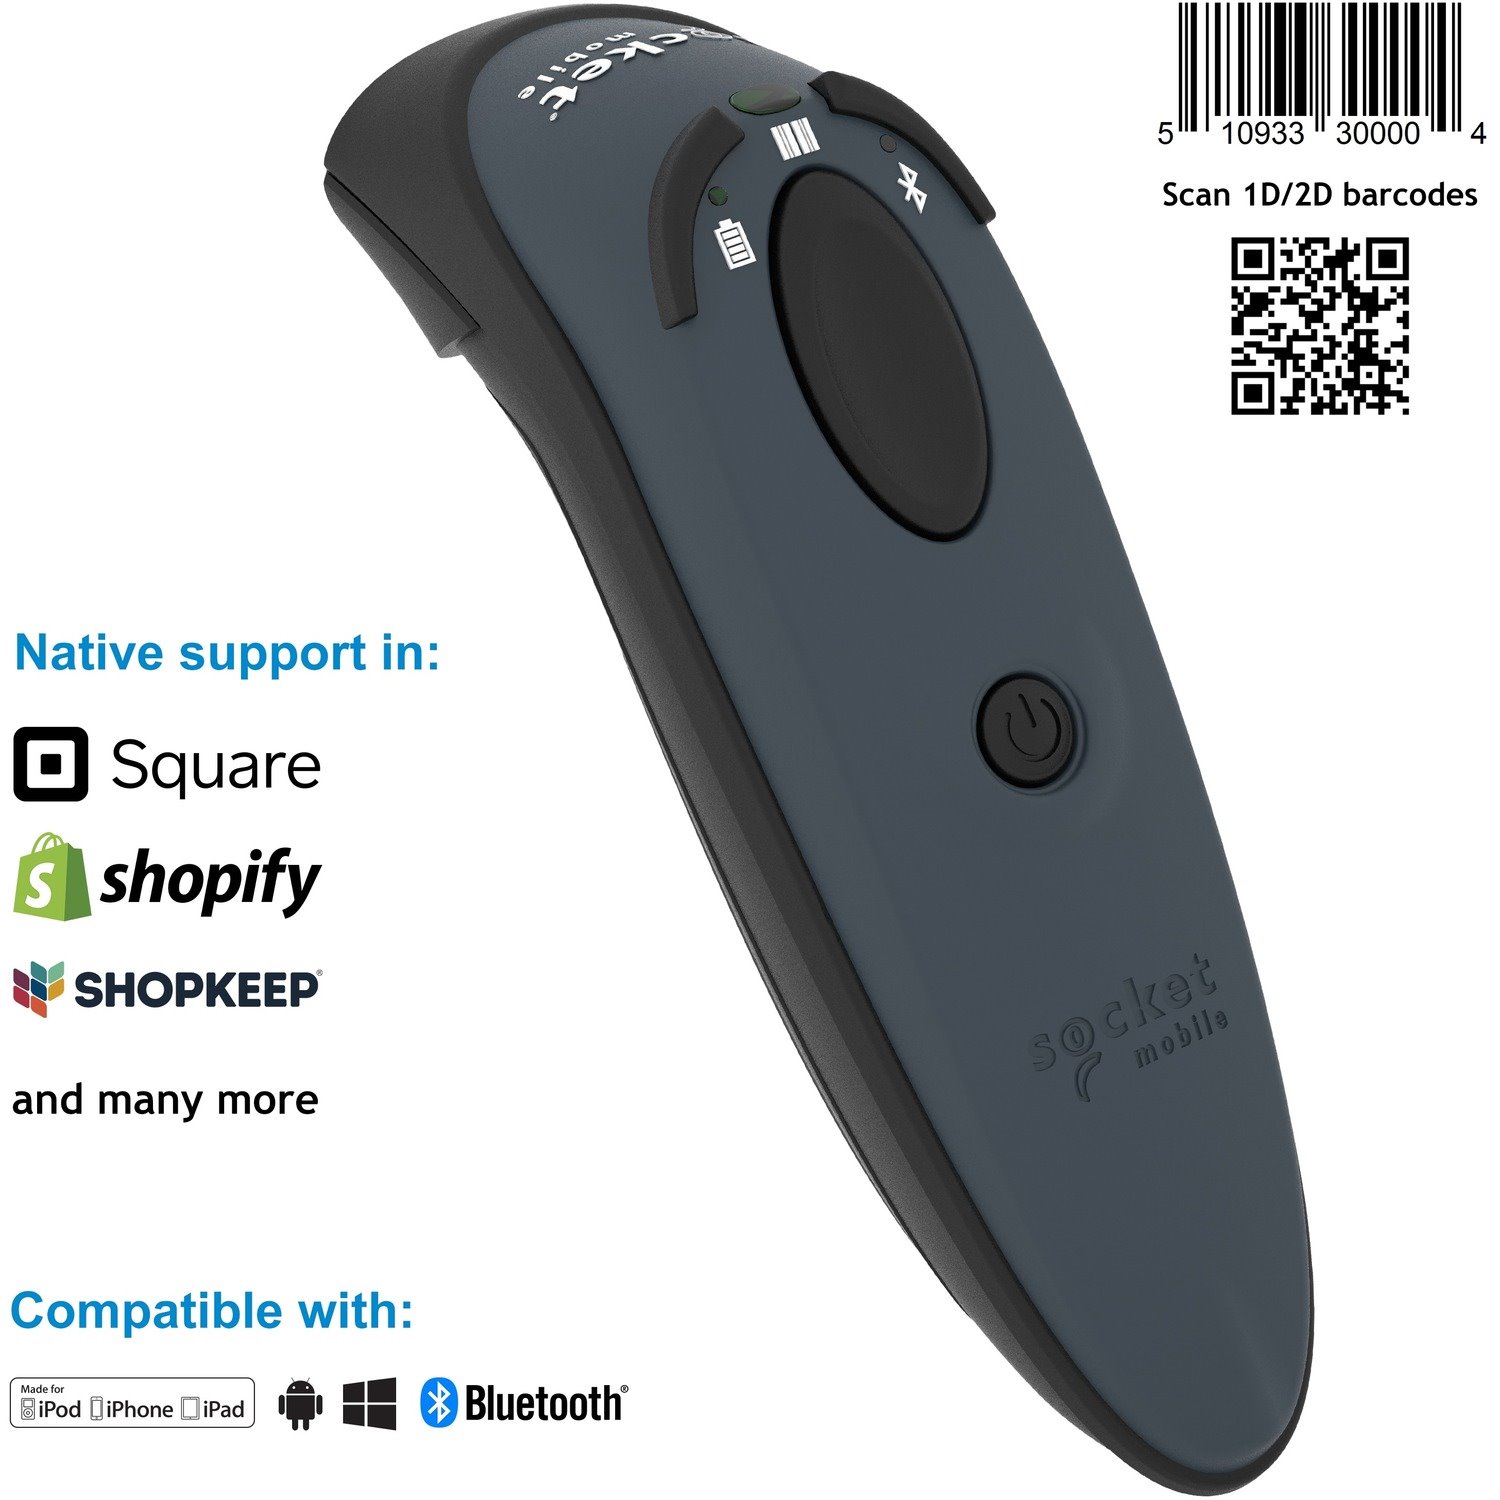 Socket Mobile DuraScan D760 Handheld Barcode Scanner - Wireless Connectivity - Utility Gray